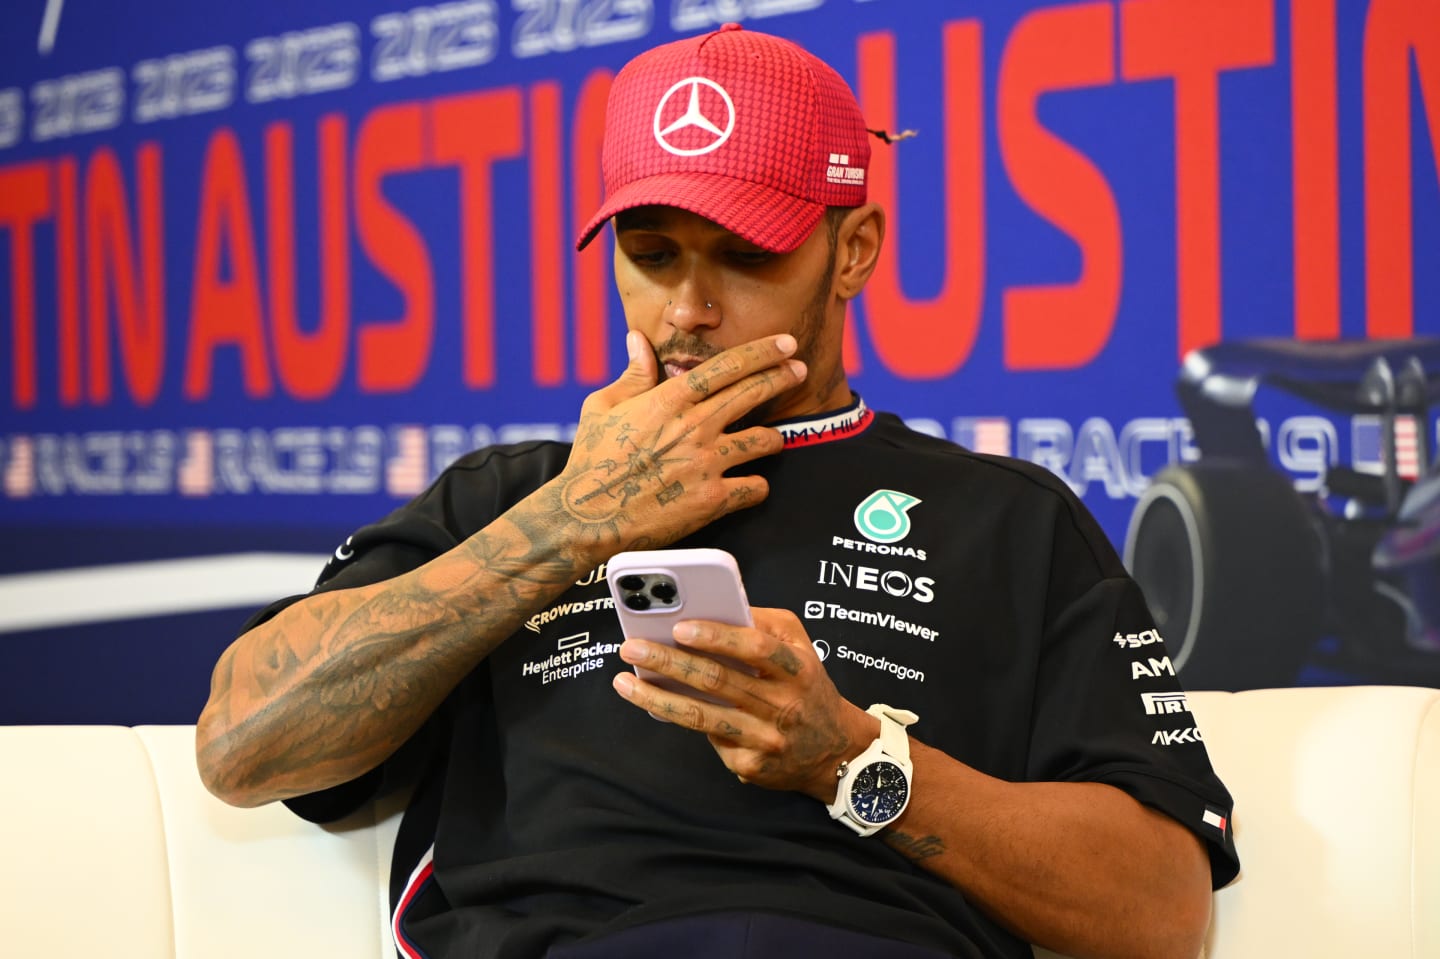 AUSTIN, TEXAS - OCTOBER 22: Second placed Lewis Hamilton of Great Britain and Mercedes talks in a